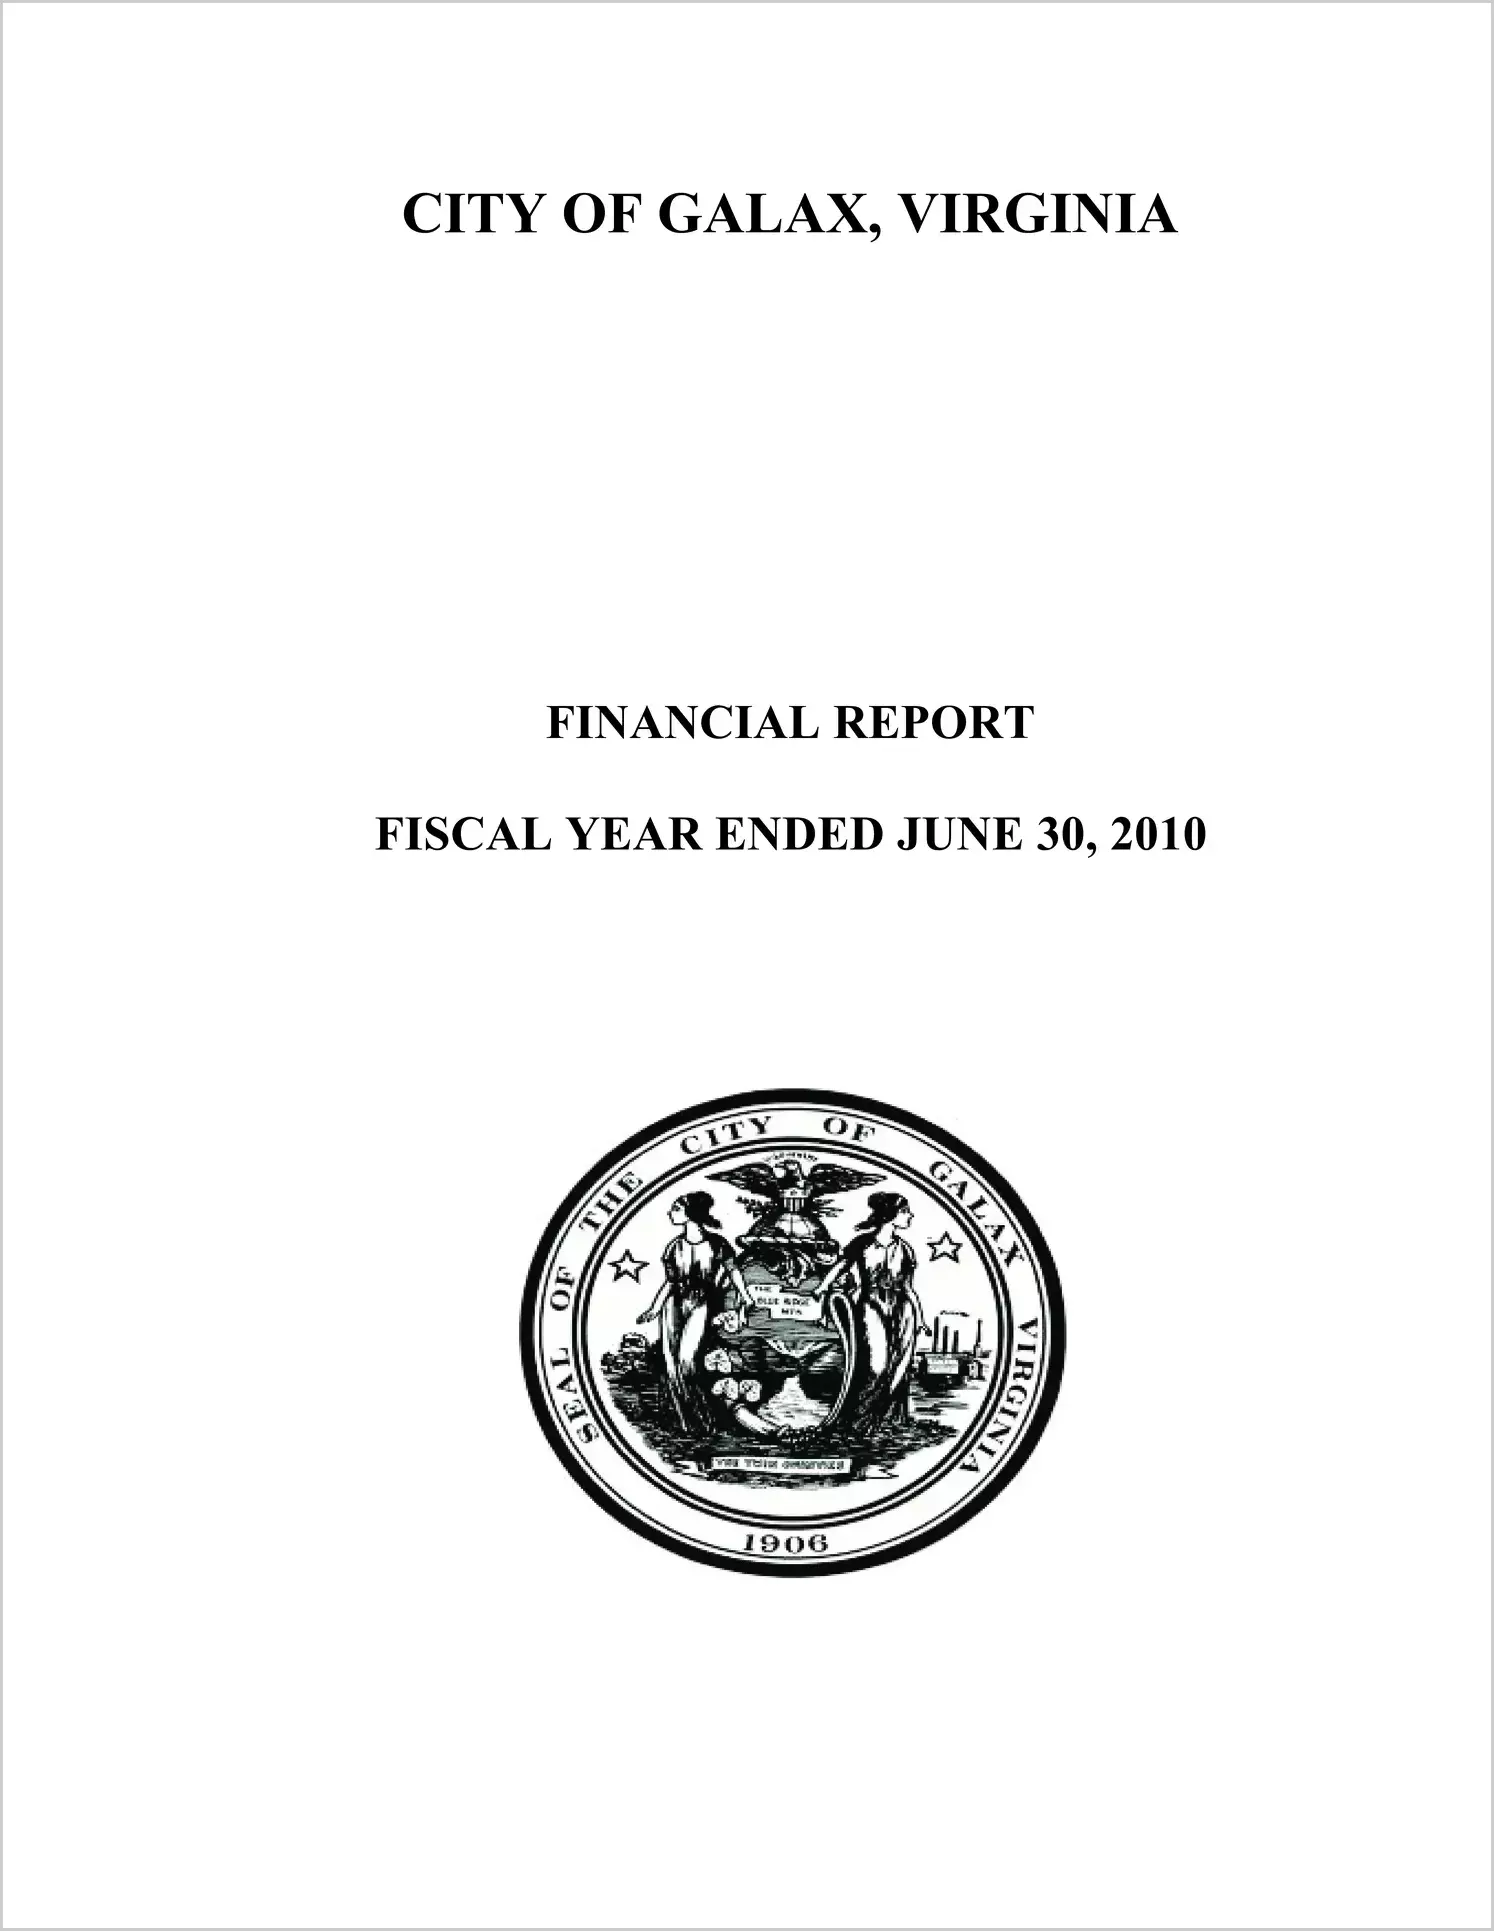 2010 Annual Financial Report for City of Galax